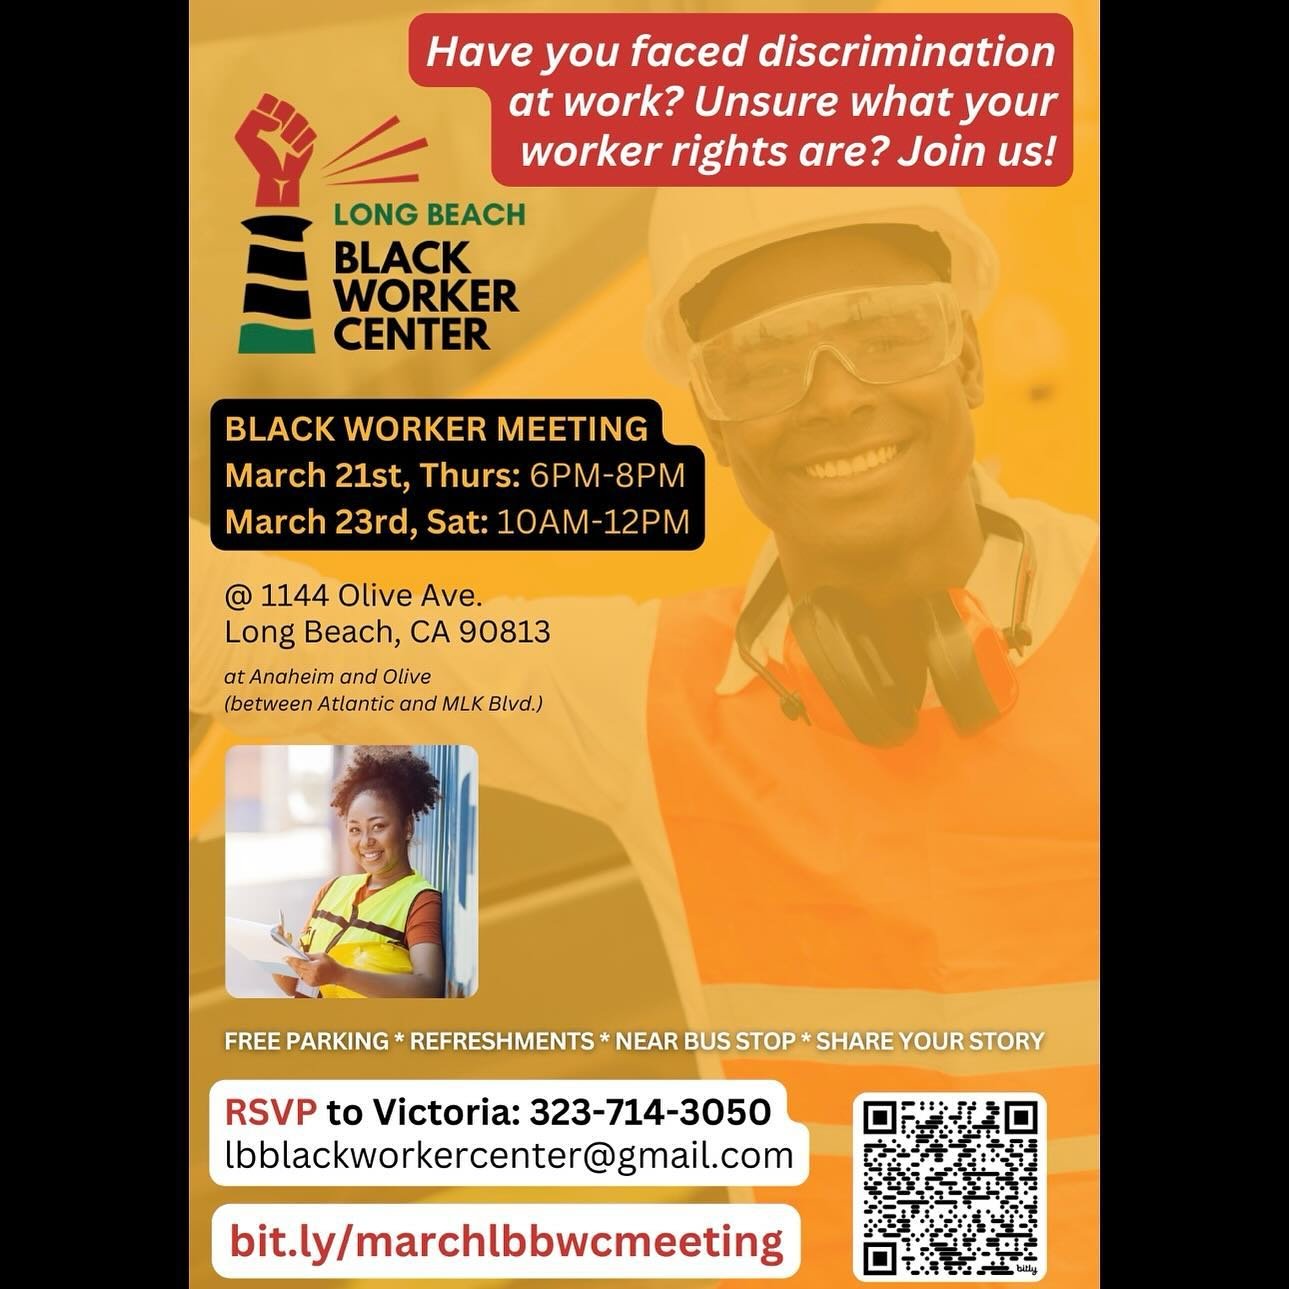 Have you faced discrimination at work? Unsure what your worker rights are? Join us! LONG BEACH BLACK WORKER CENTER: BLACK WORKER MEETING

Pick a date:
March 21st, Thurs: 6PM-8PM -or-
March 23rd, Sat: 10AM-12PM
@ 1144 Olive Ave.
Long Beach, CA 90813
a